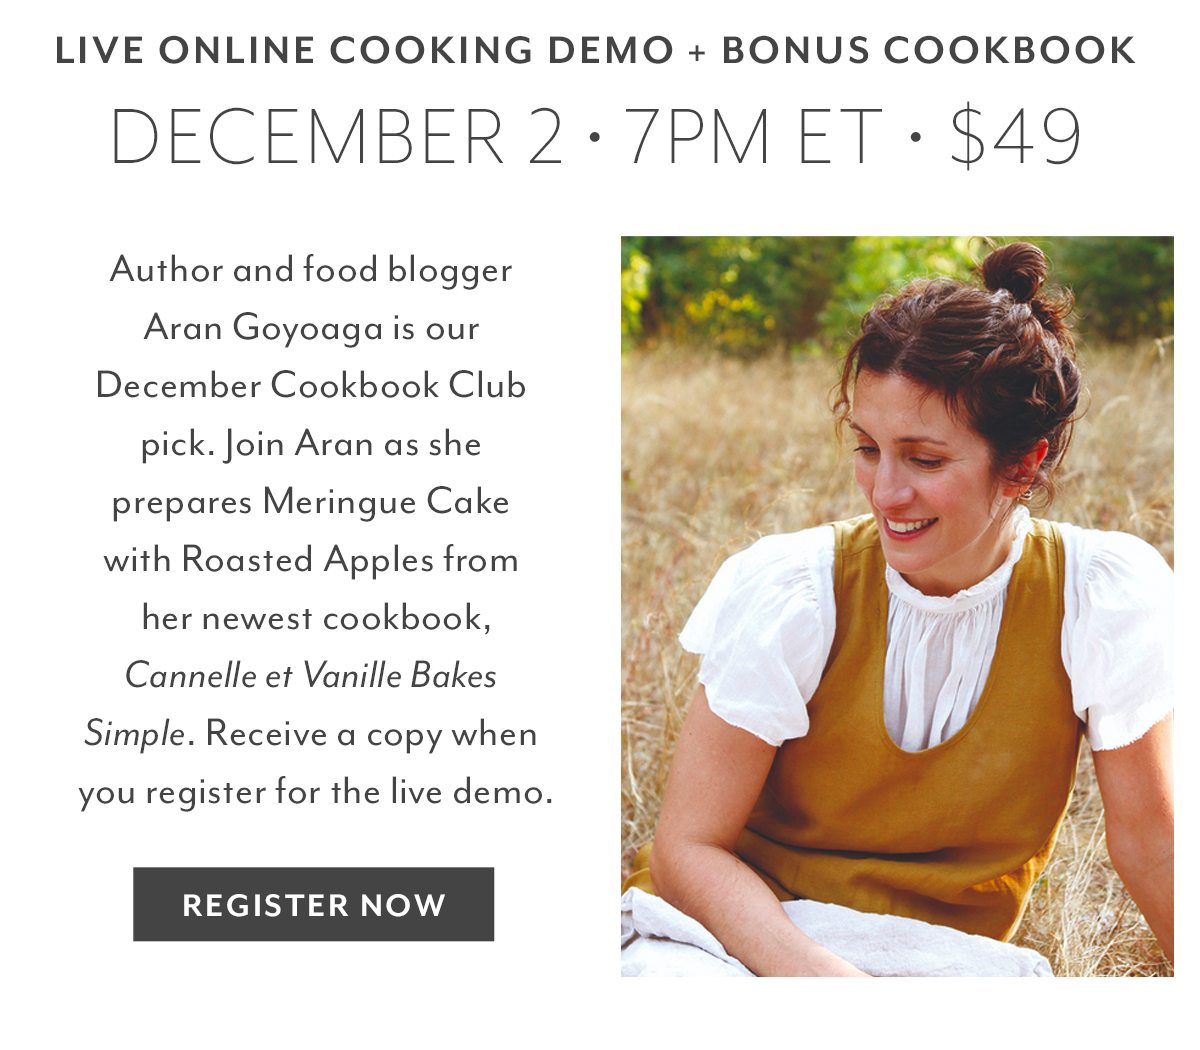 LIVE COOKING DEMO